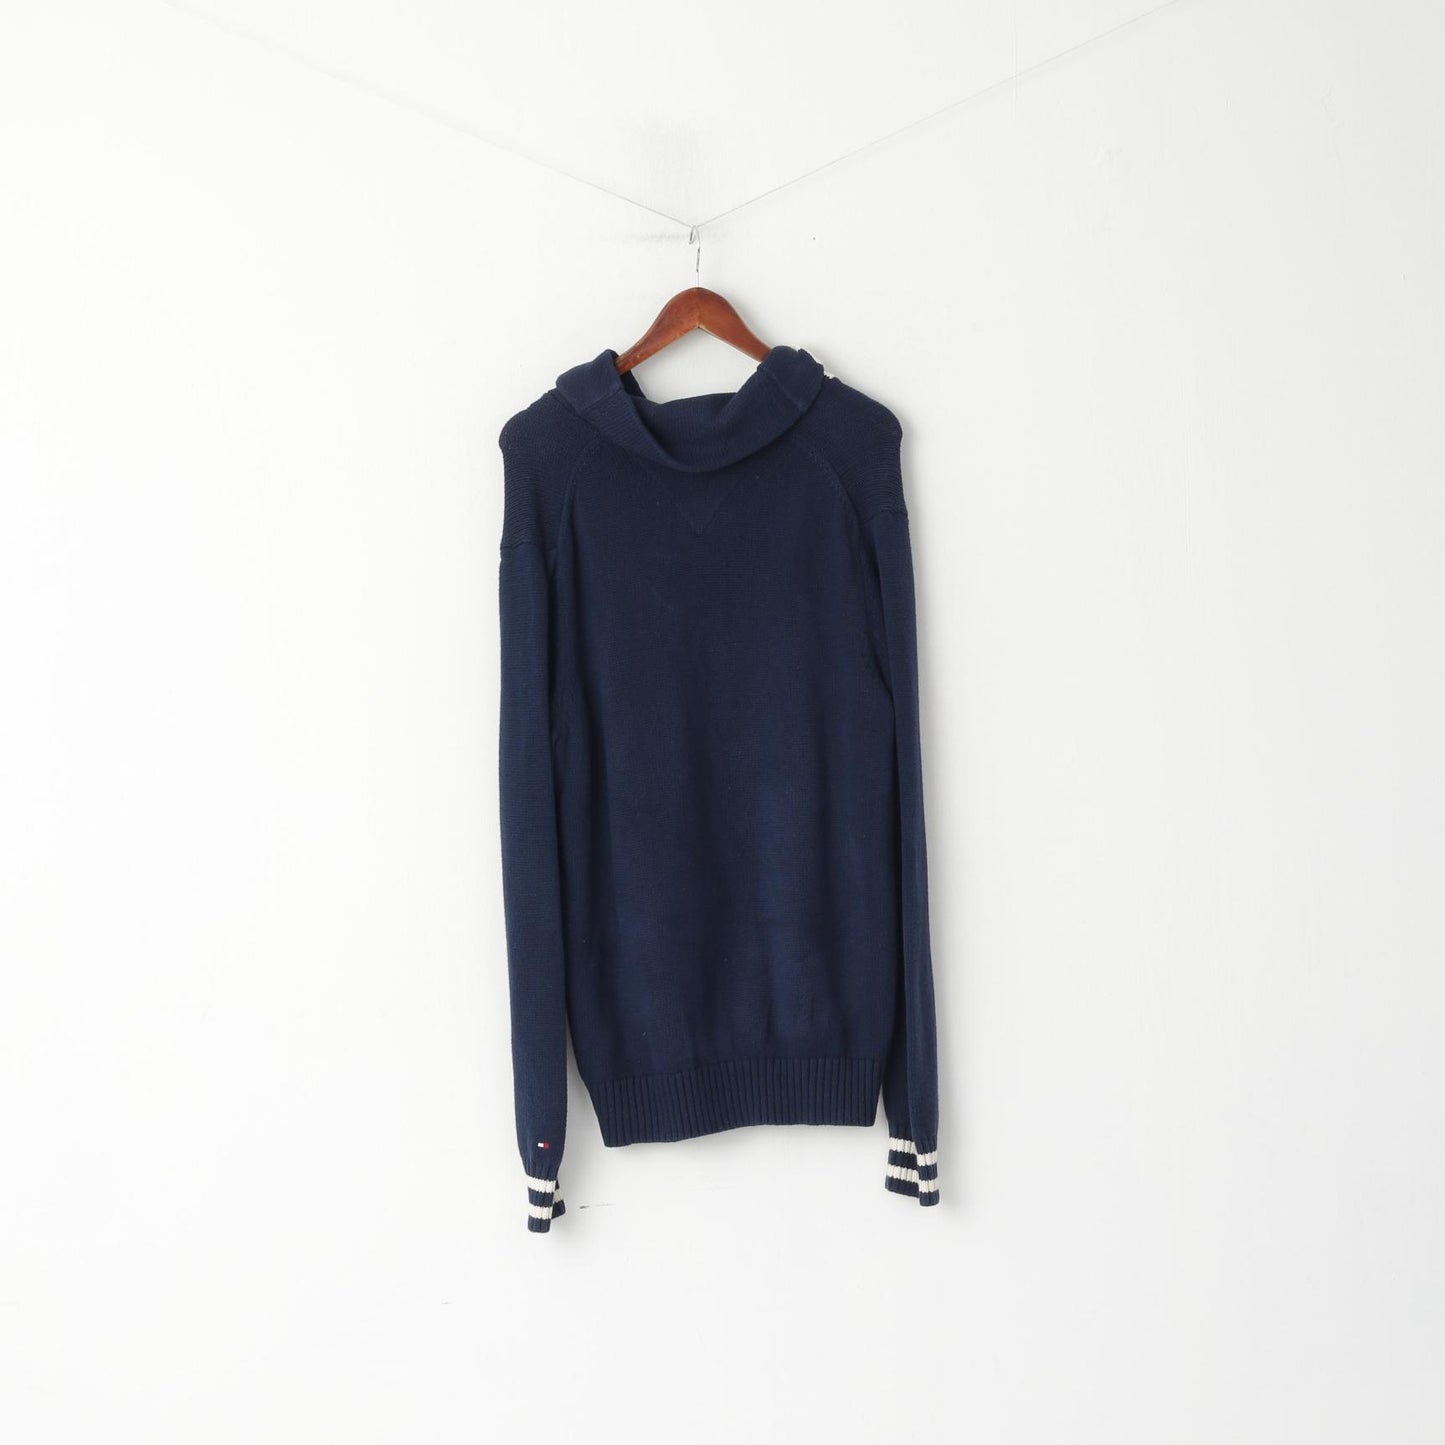 Tommy Hilfiger Hommes L Jumper Marine Coton Tricot Col Châle Pull Pull